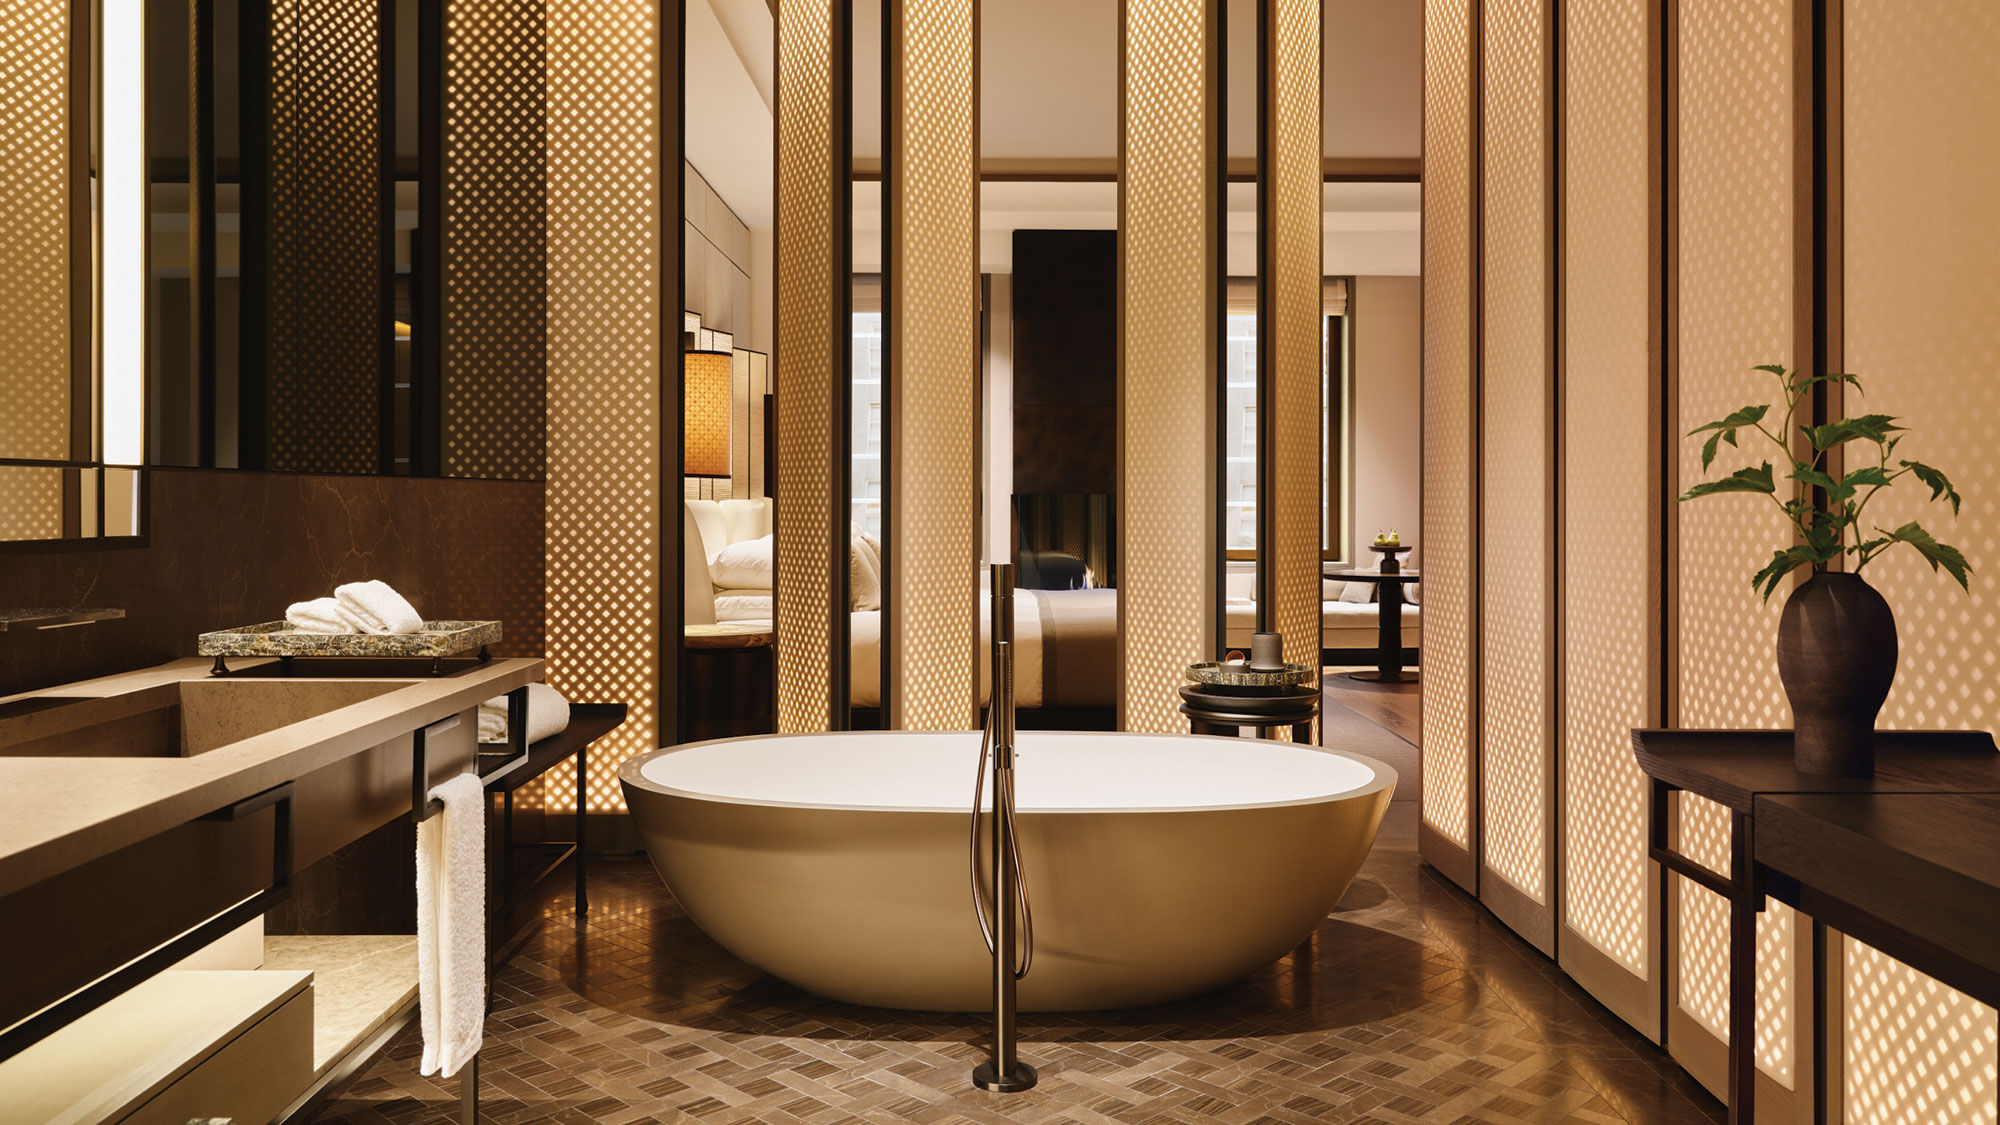 A Fifth Avenue Junior Suite bathroom with soaking tub at the Aman New York. Entry-level room rates start at $3,200 a night.